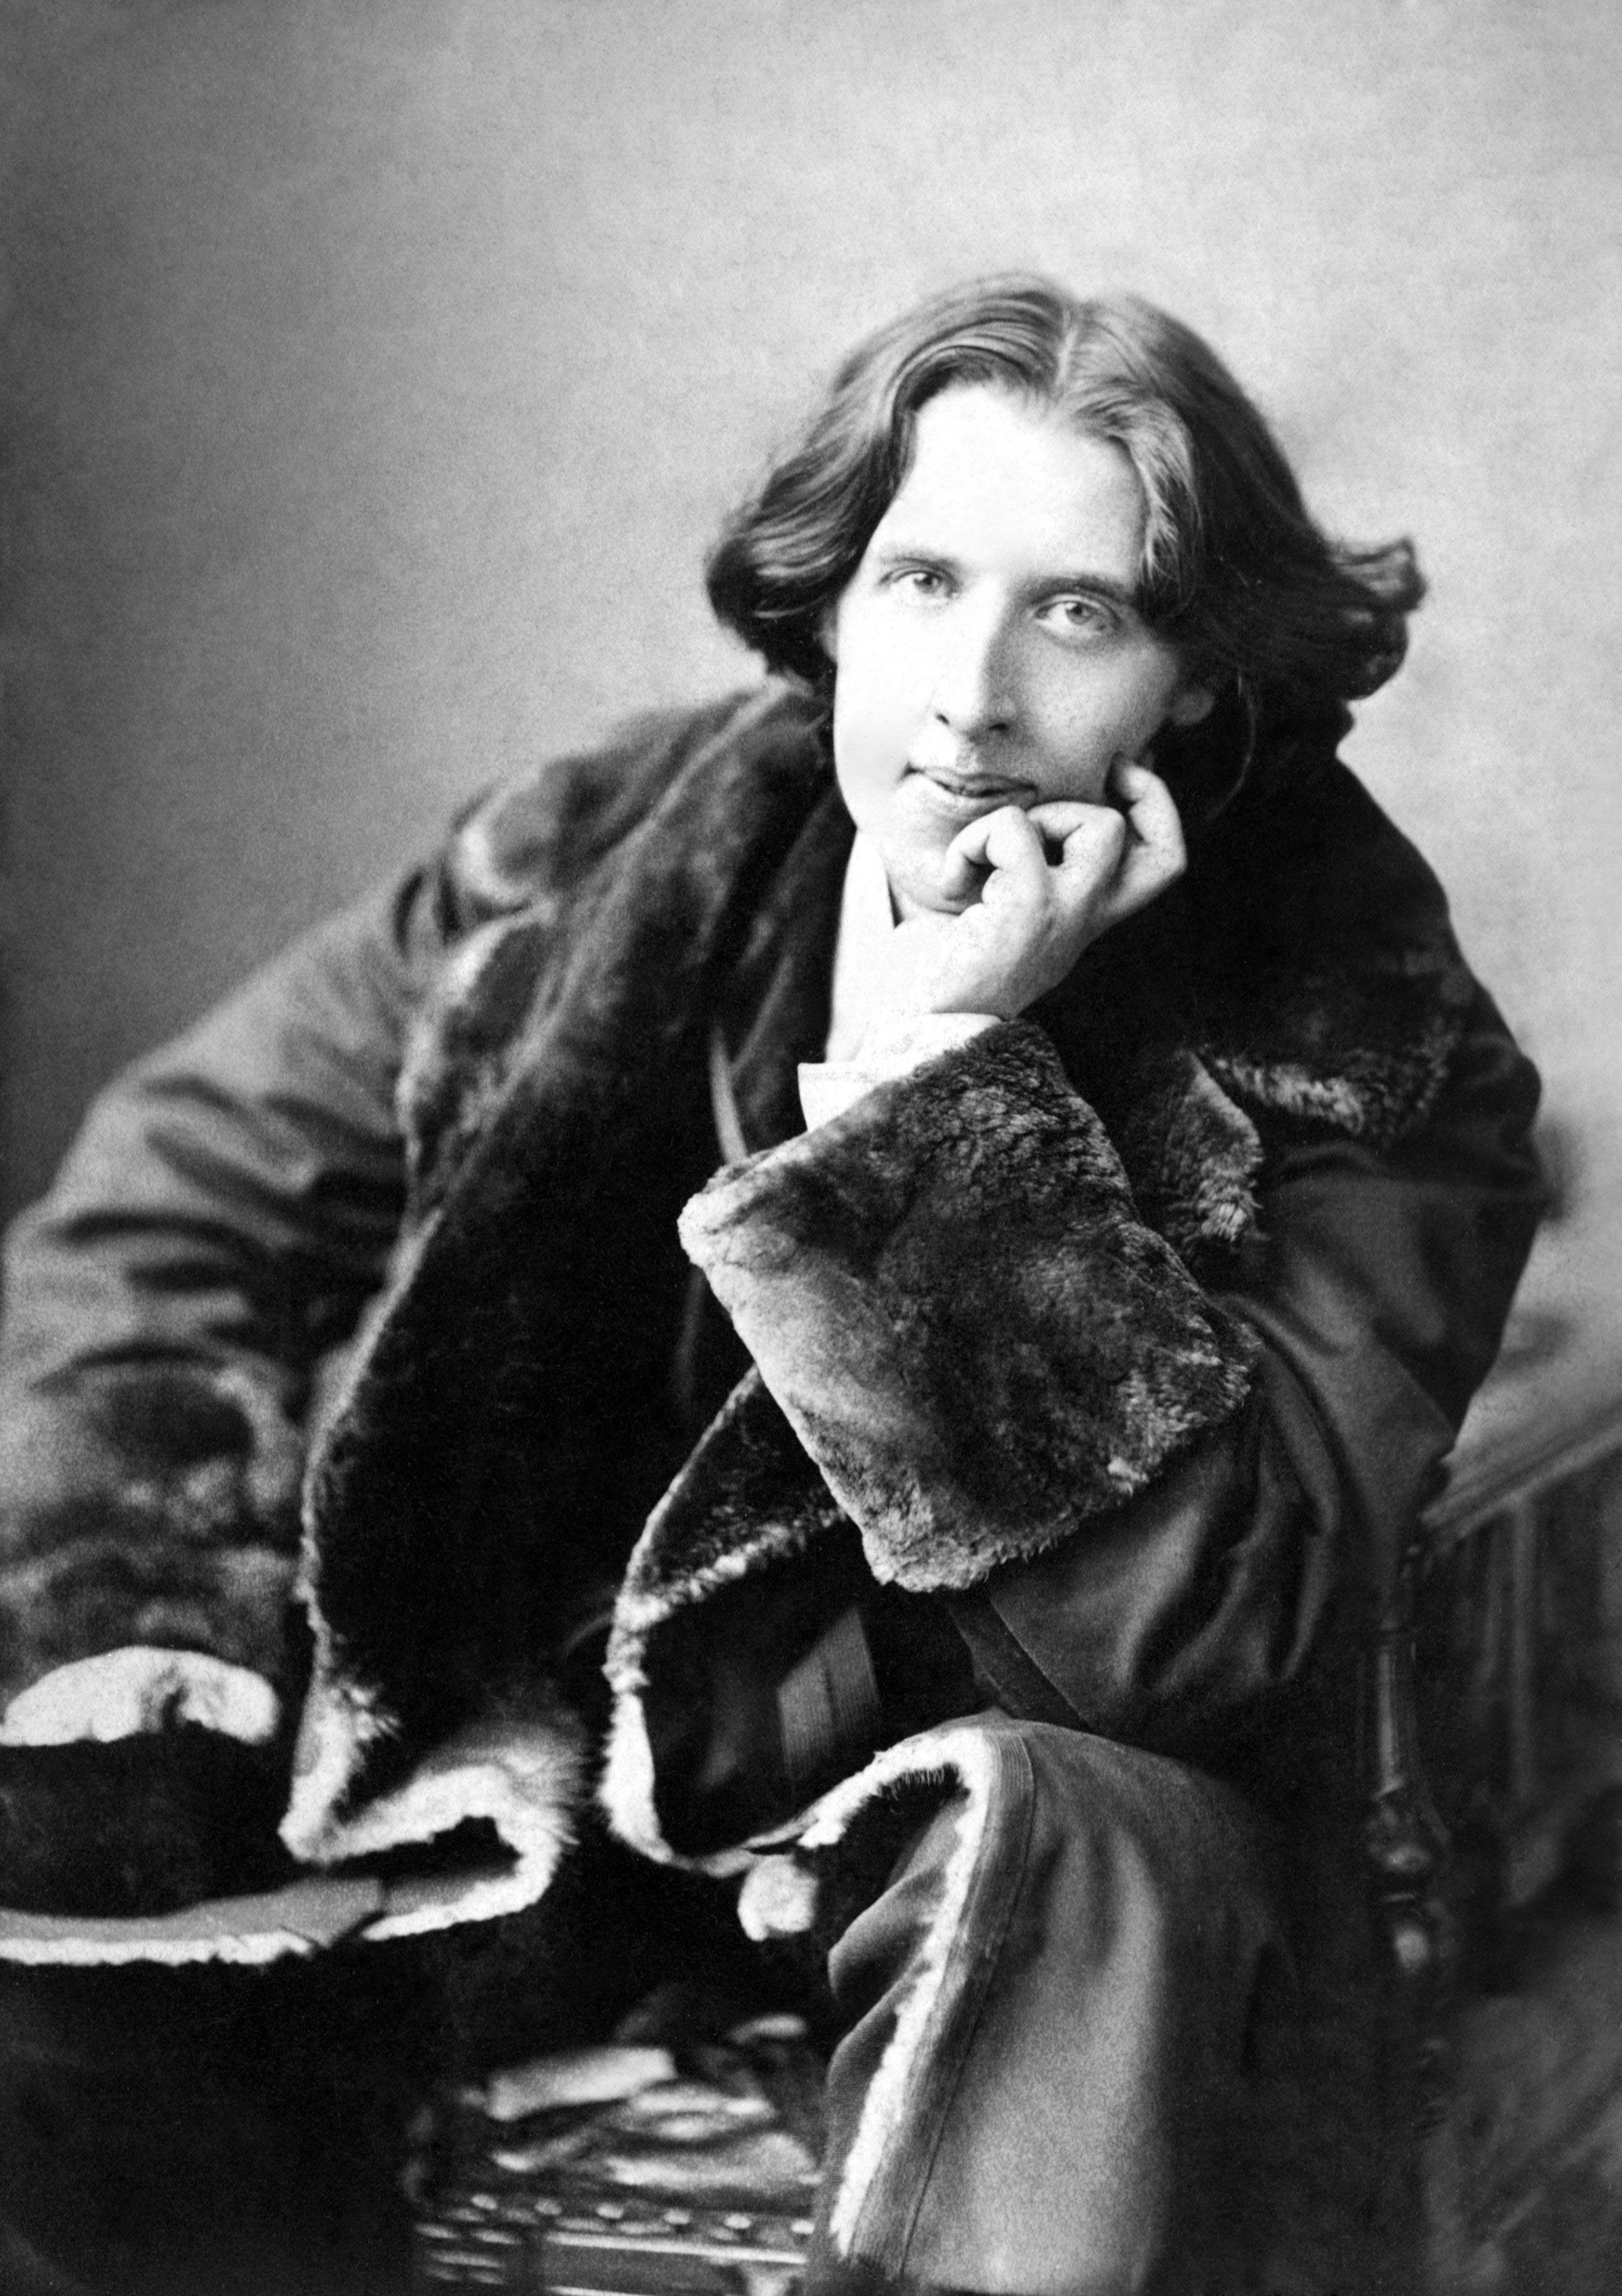 Oscar Wilde posing for a picture in his favorite coat